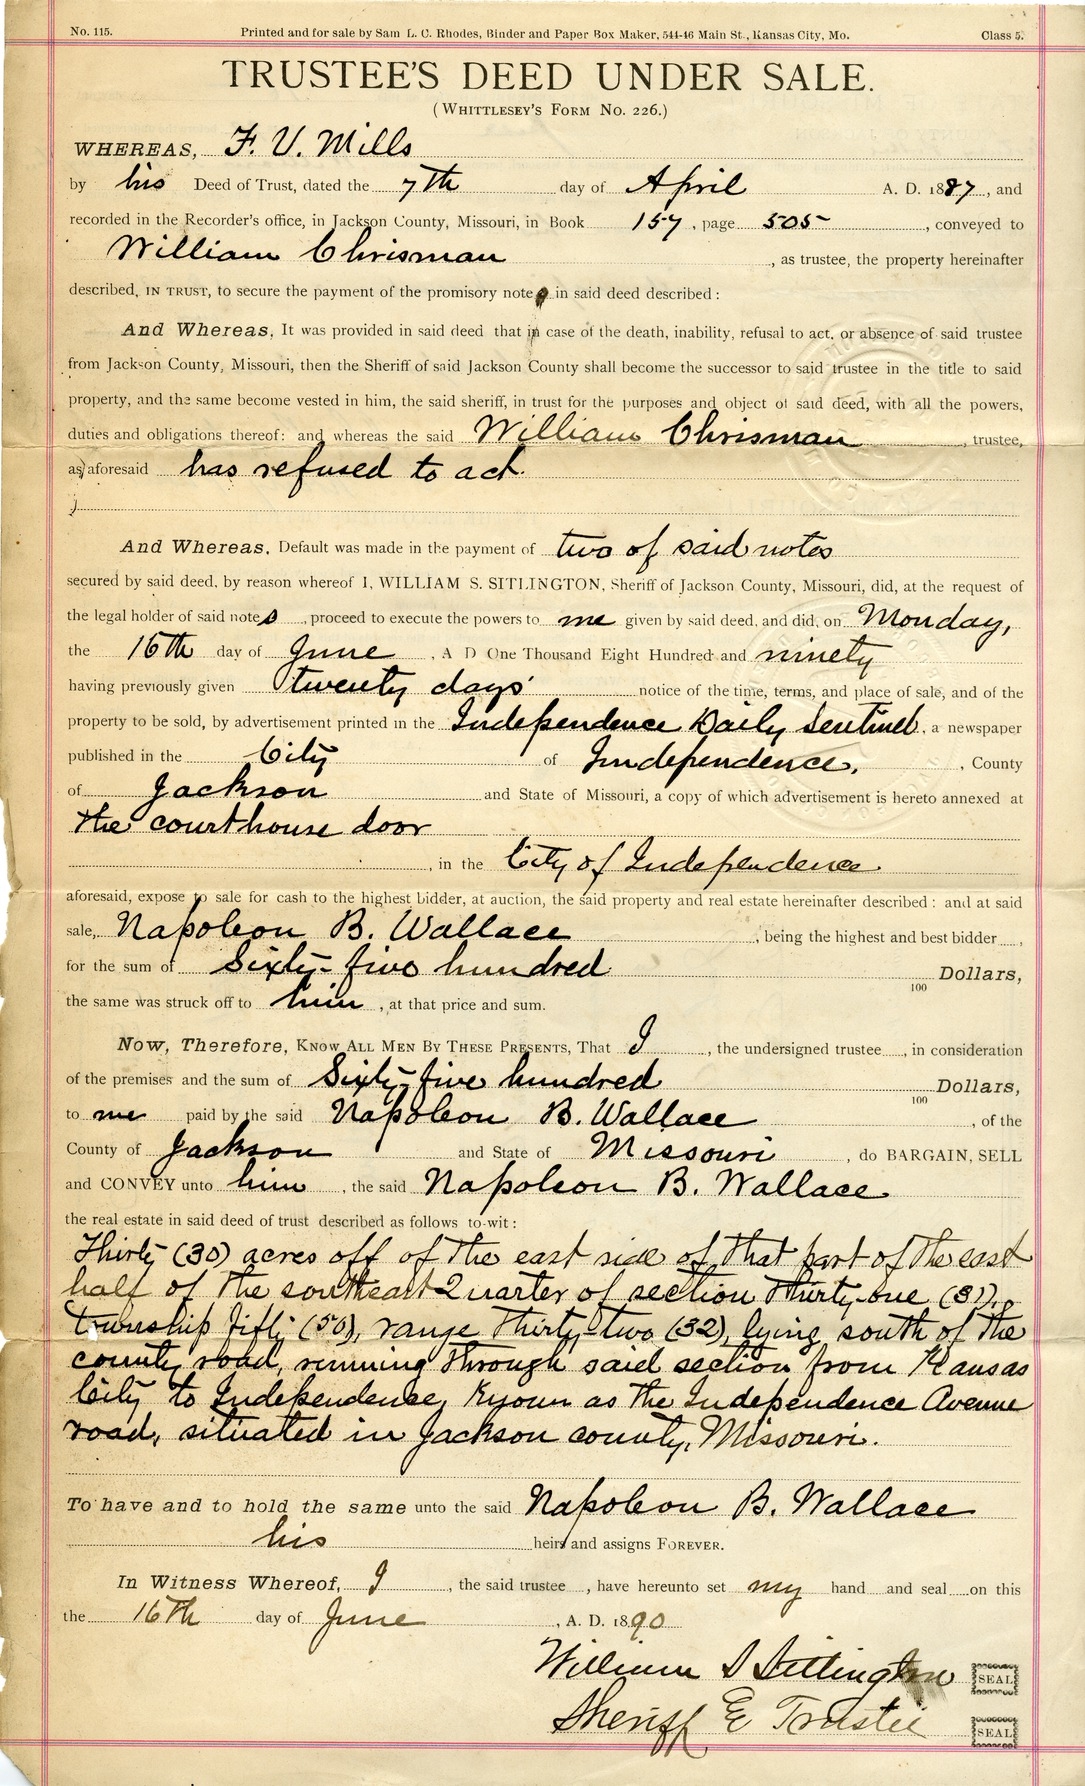 Trustee's Deed Under Sale from William S. Sitlington to Napoleon B. Wallace